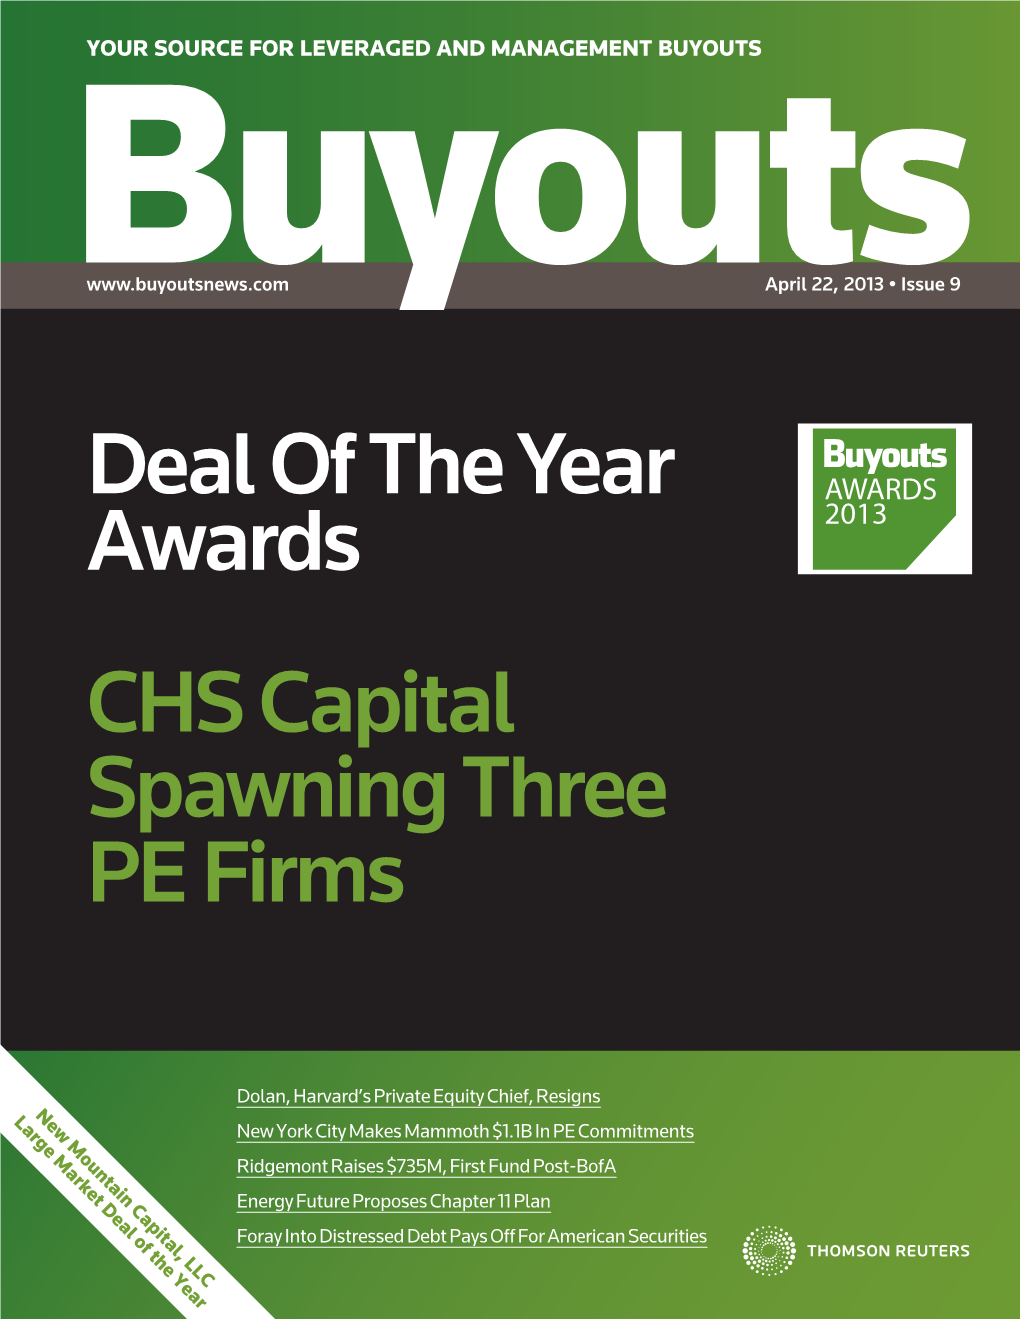 Buyouts Large Market Deal of the Year